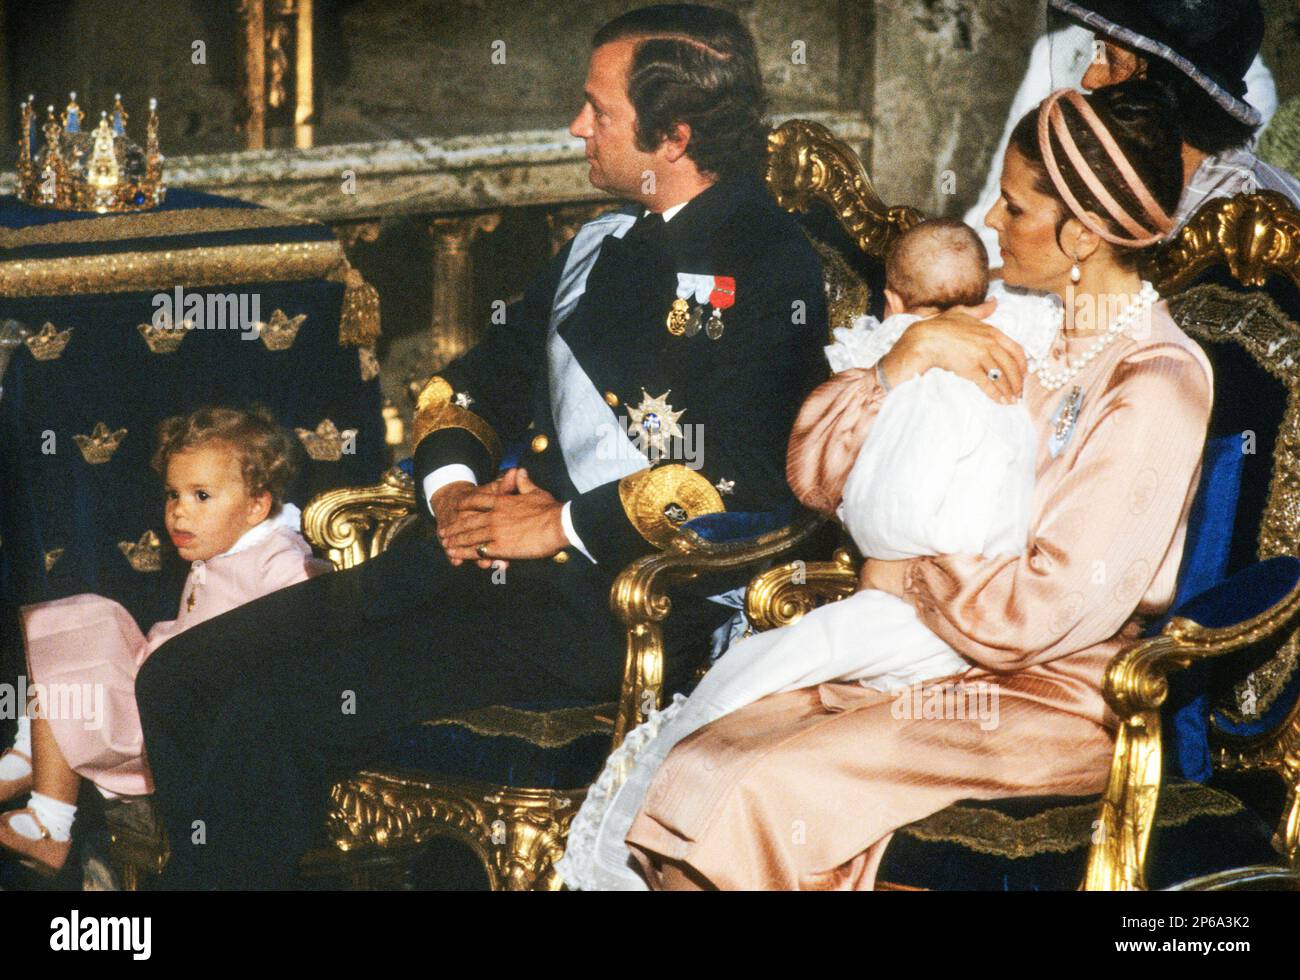 The Baptism of Prince Carl Philip in the Churce at Royal Palace in Stockholm 1979-08-31 Stock Photo